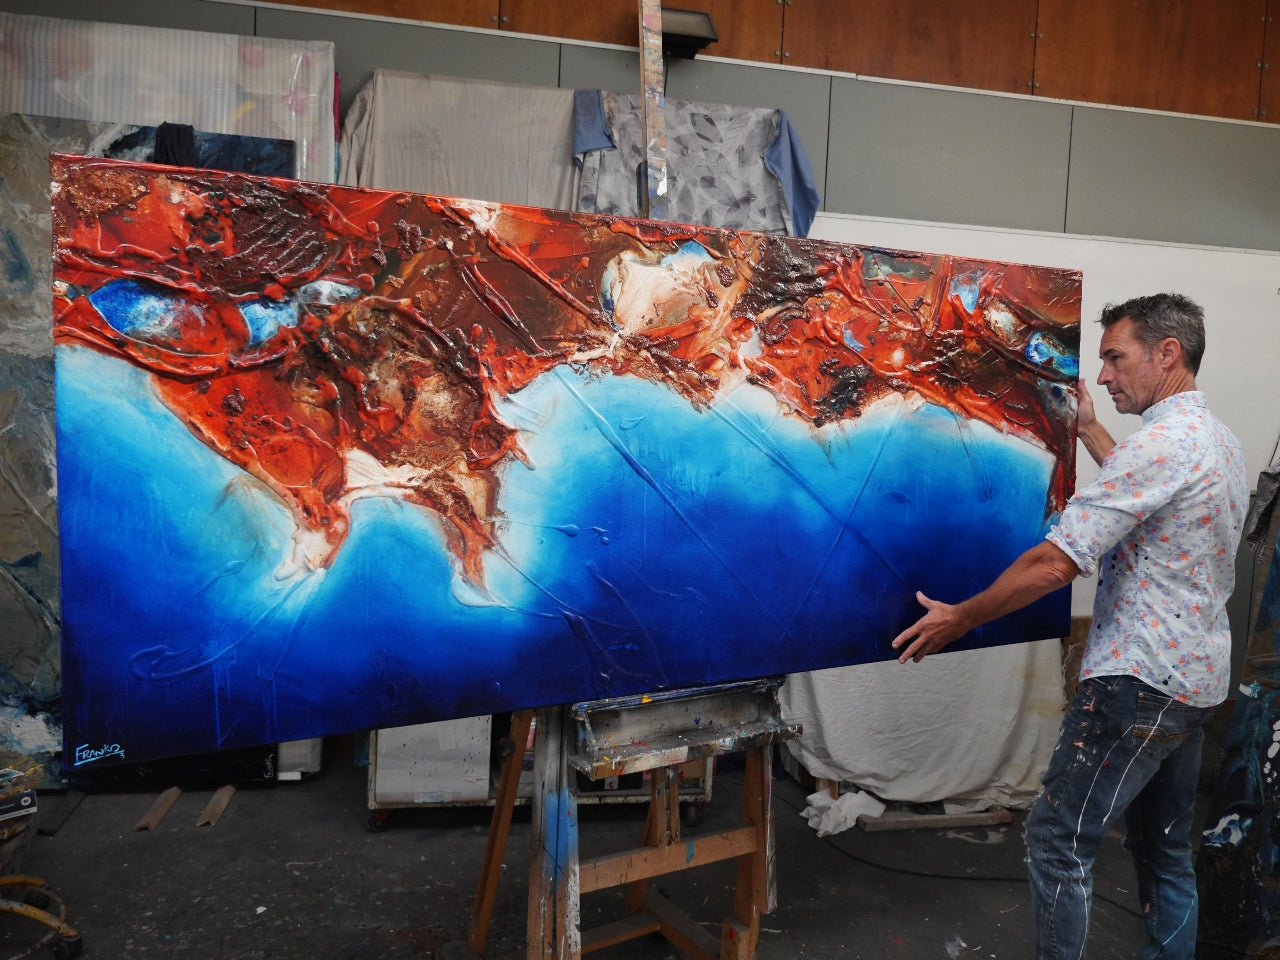 Sunburnt Coast 240cm x 100cm Textured Abstract Painting (SOLD)